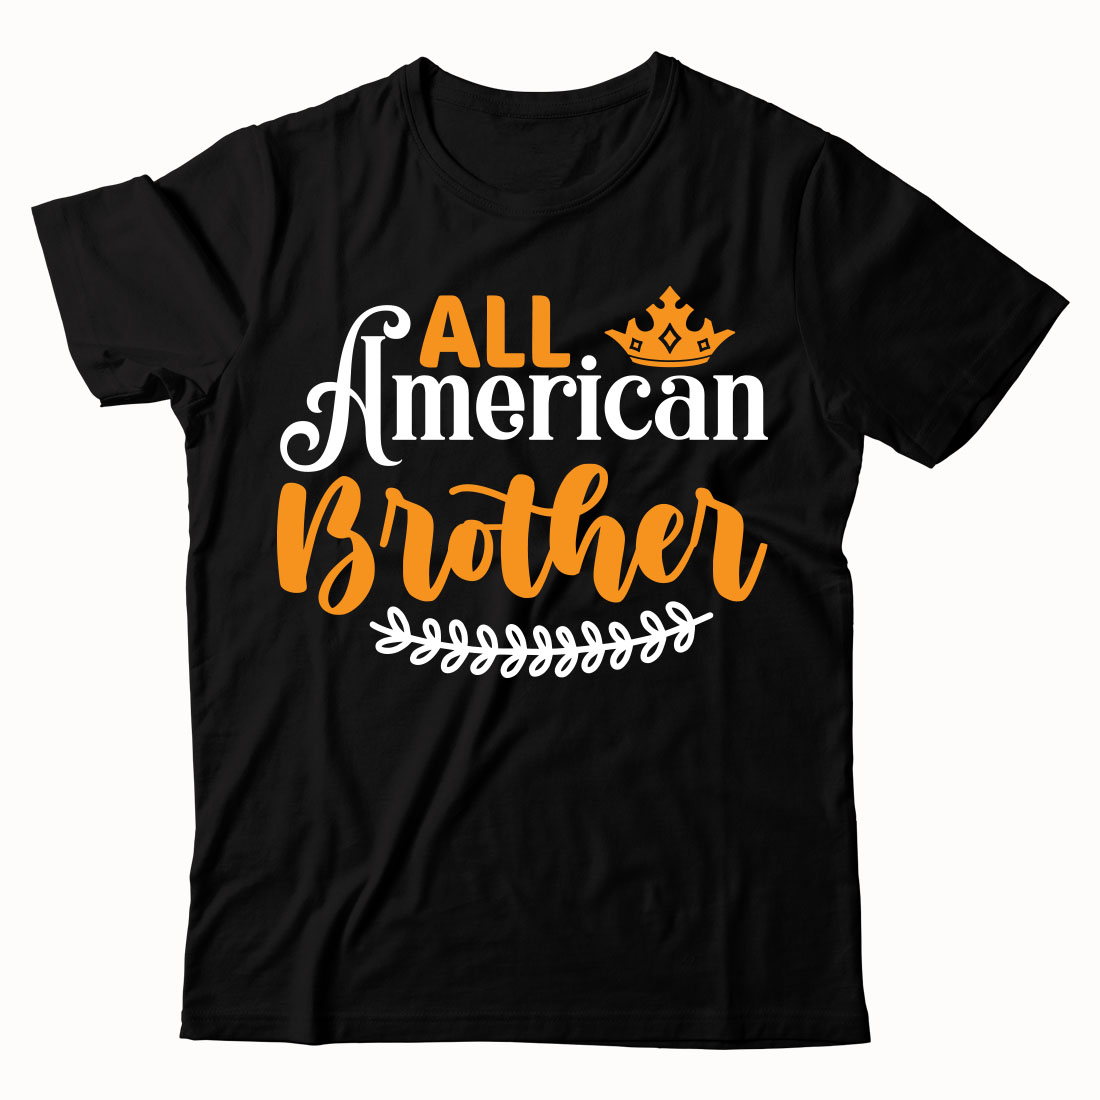 Black t - shirt that says all american brother.